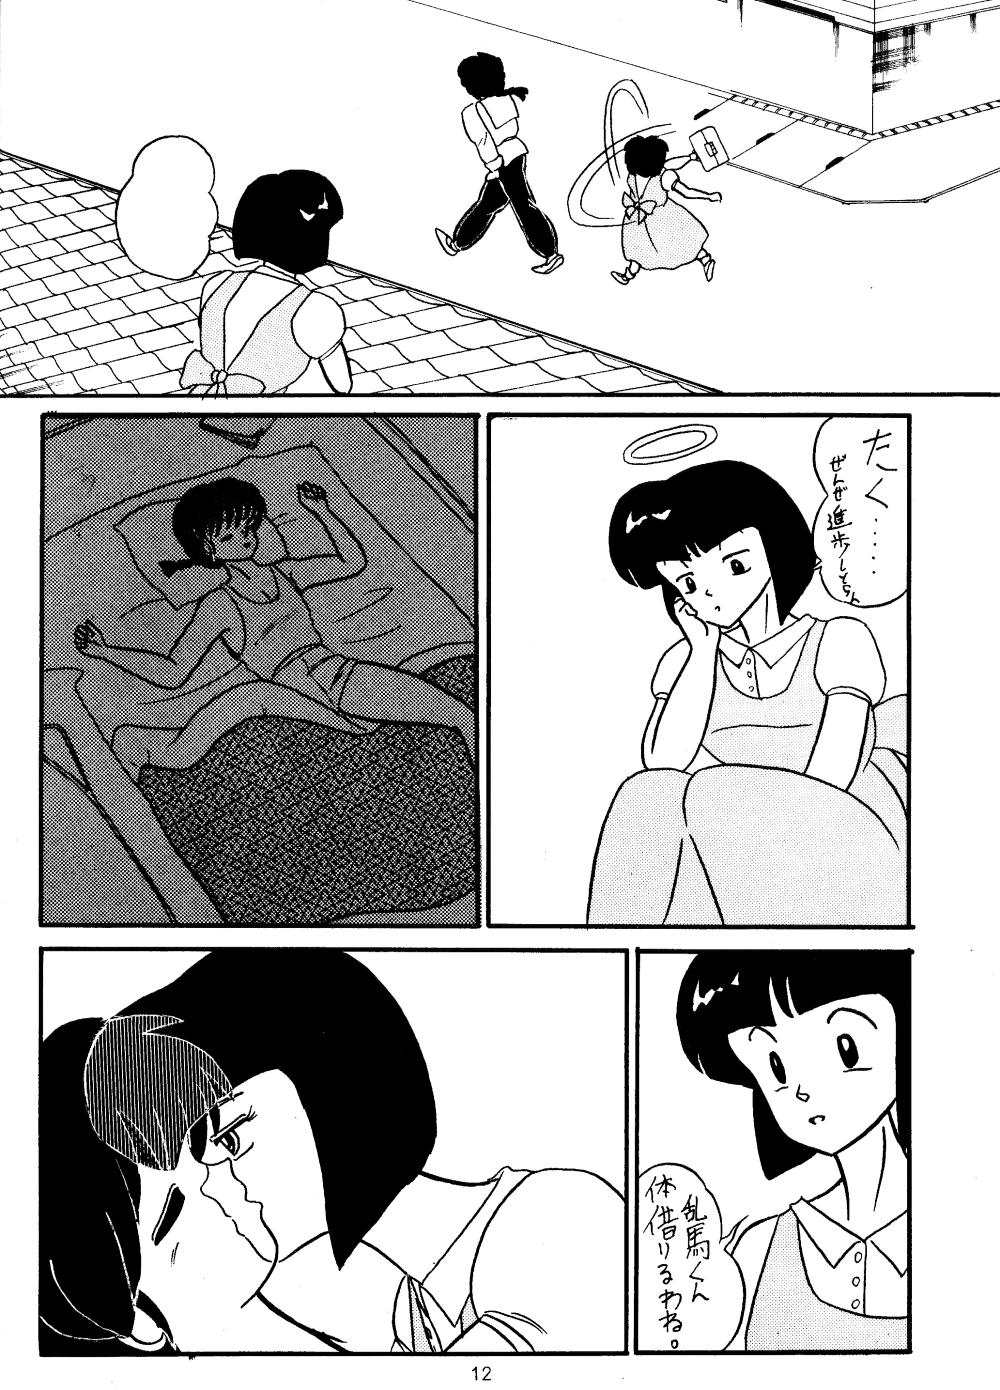 Best Blowjobs Ever Ran - Ranma 12 Amadora - Page 10